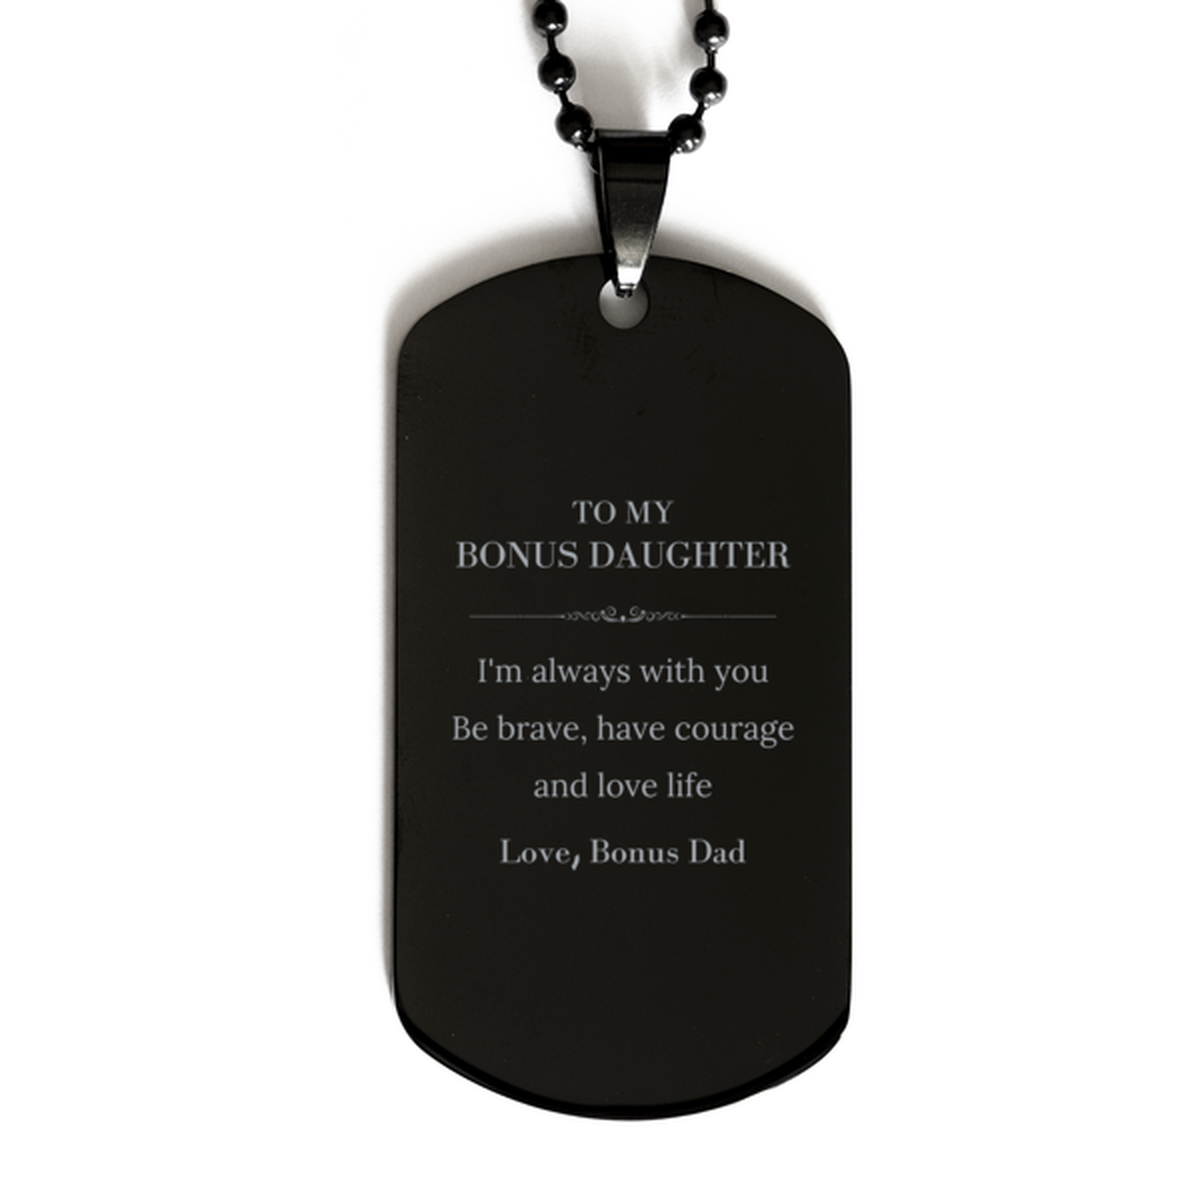 To My Bonus Daughter Gifts from Bonus Dad, Unique Black Dog Tag Inspirational Christmas Birthday Graduation Gifts for Bonus Daughter I'm always with you. Be brave, have courage and love life. Love, Bonus Dad